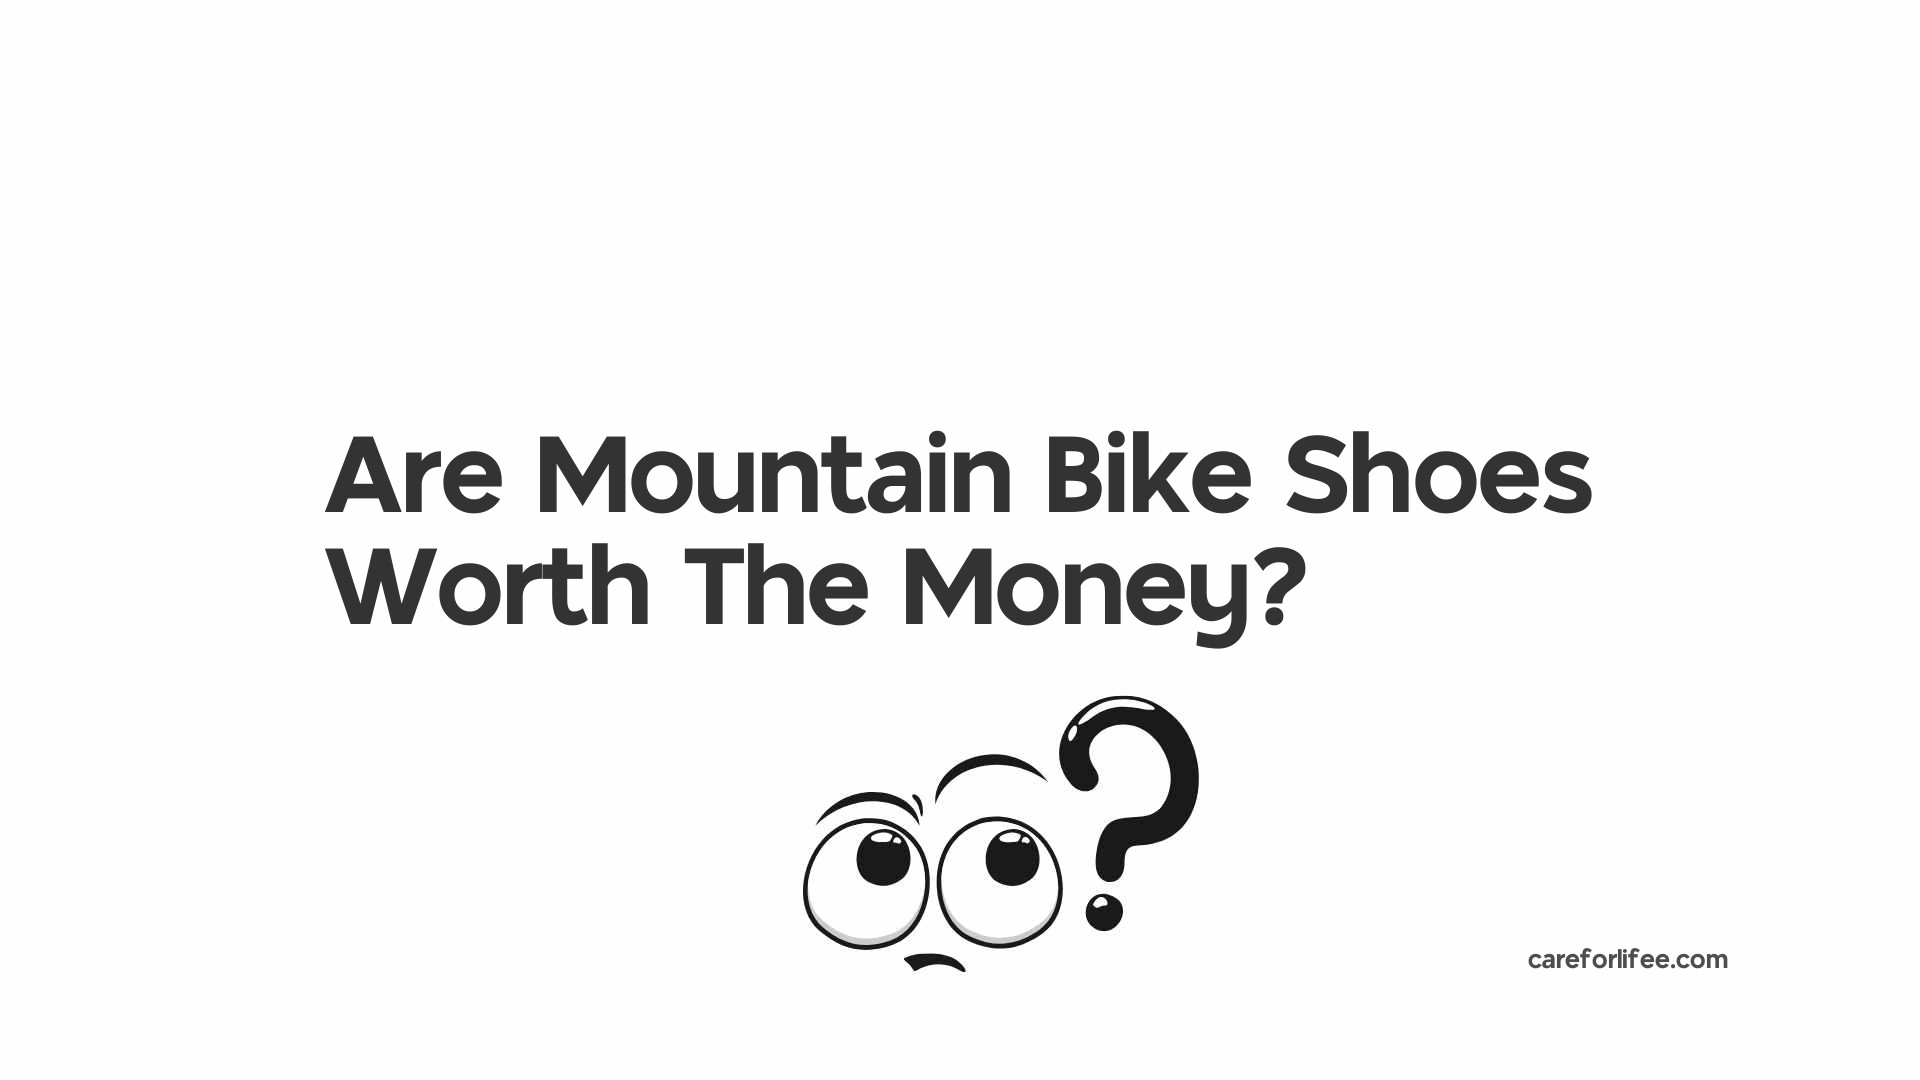 Are Mountain Bike Shoes Worth The Money?